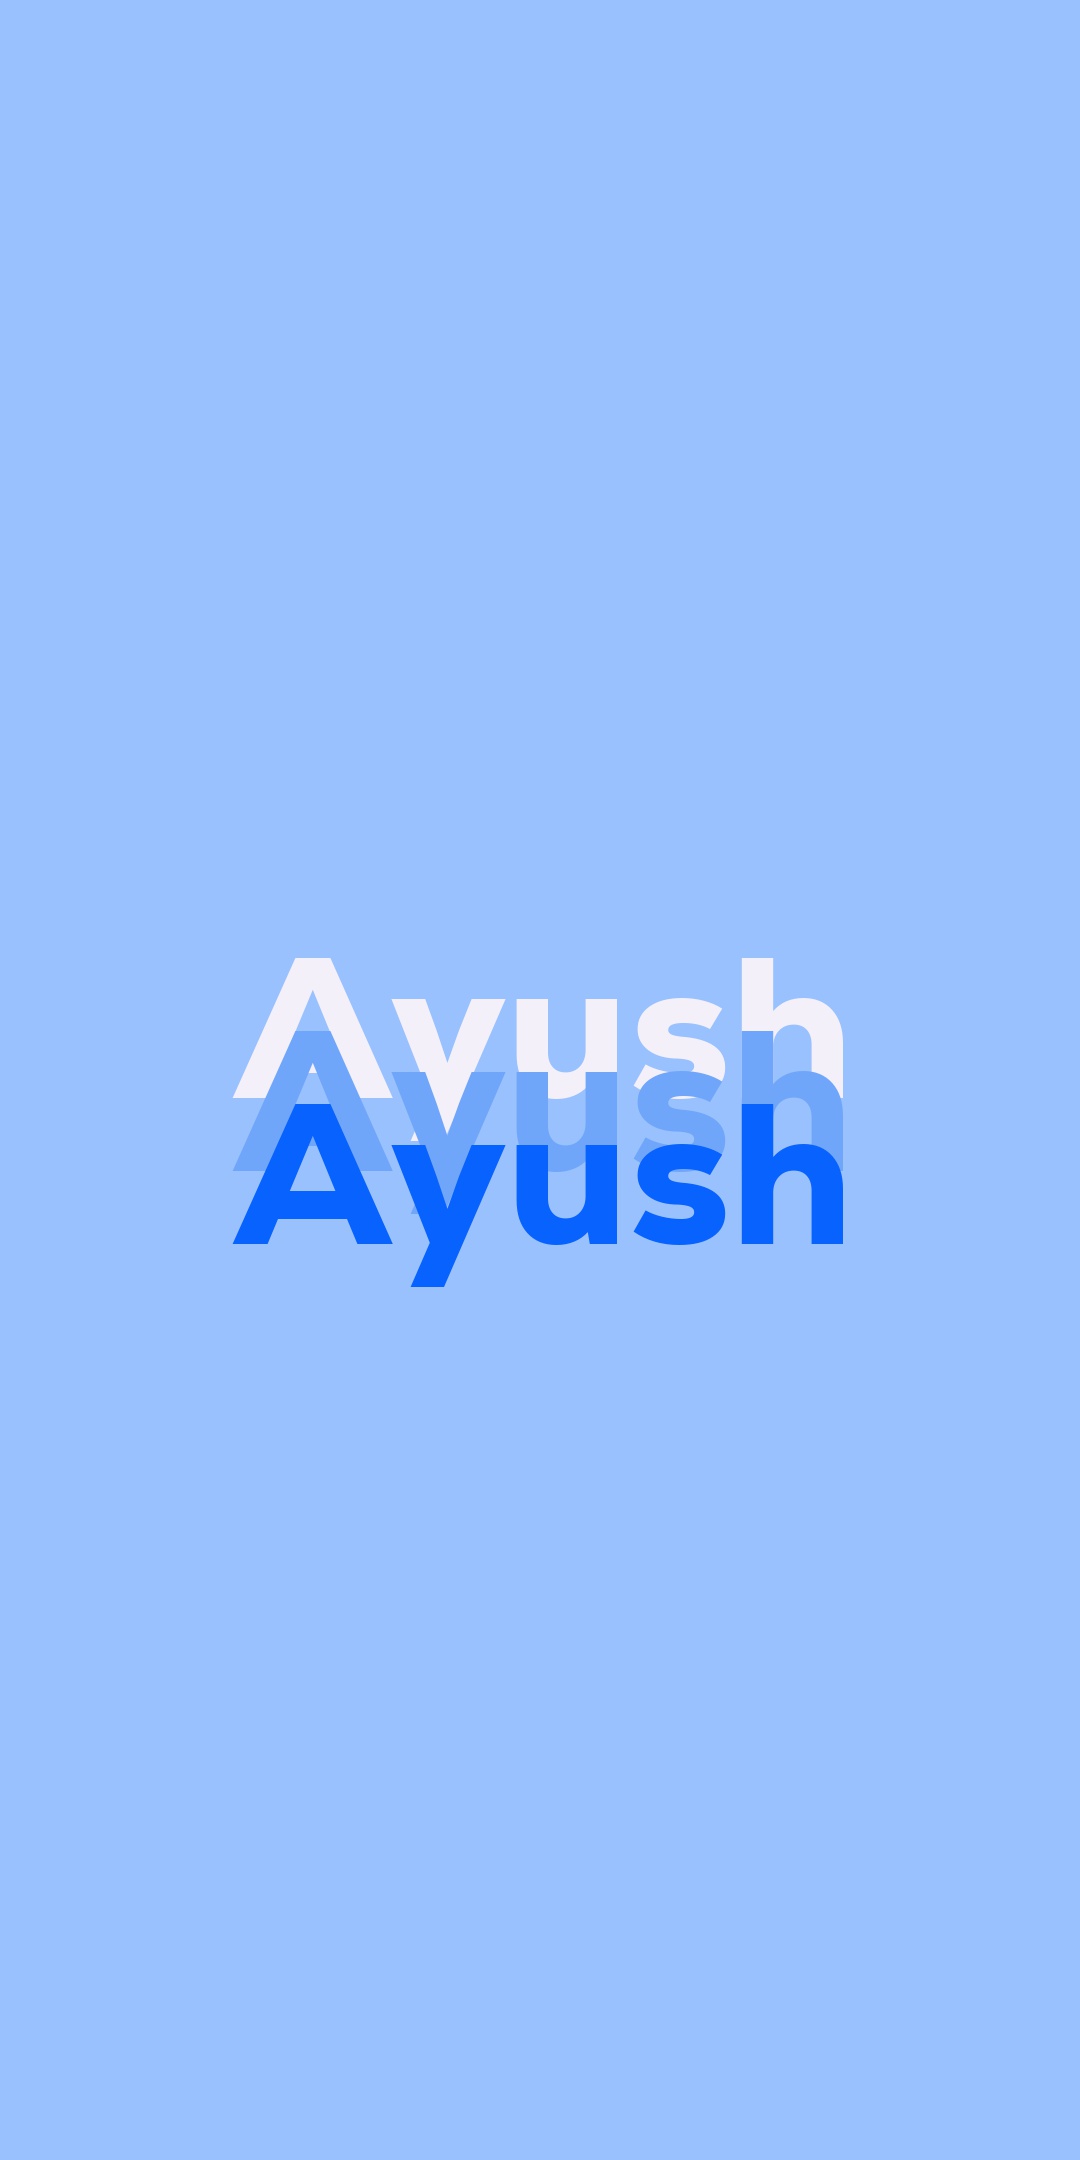 Ayush Discography | Discogs